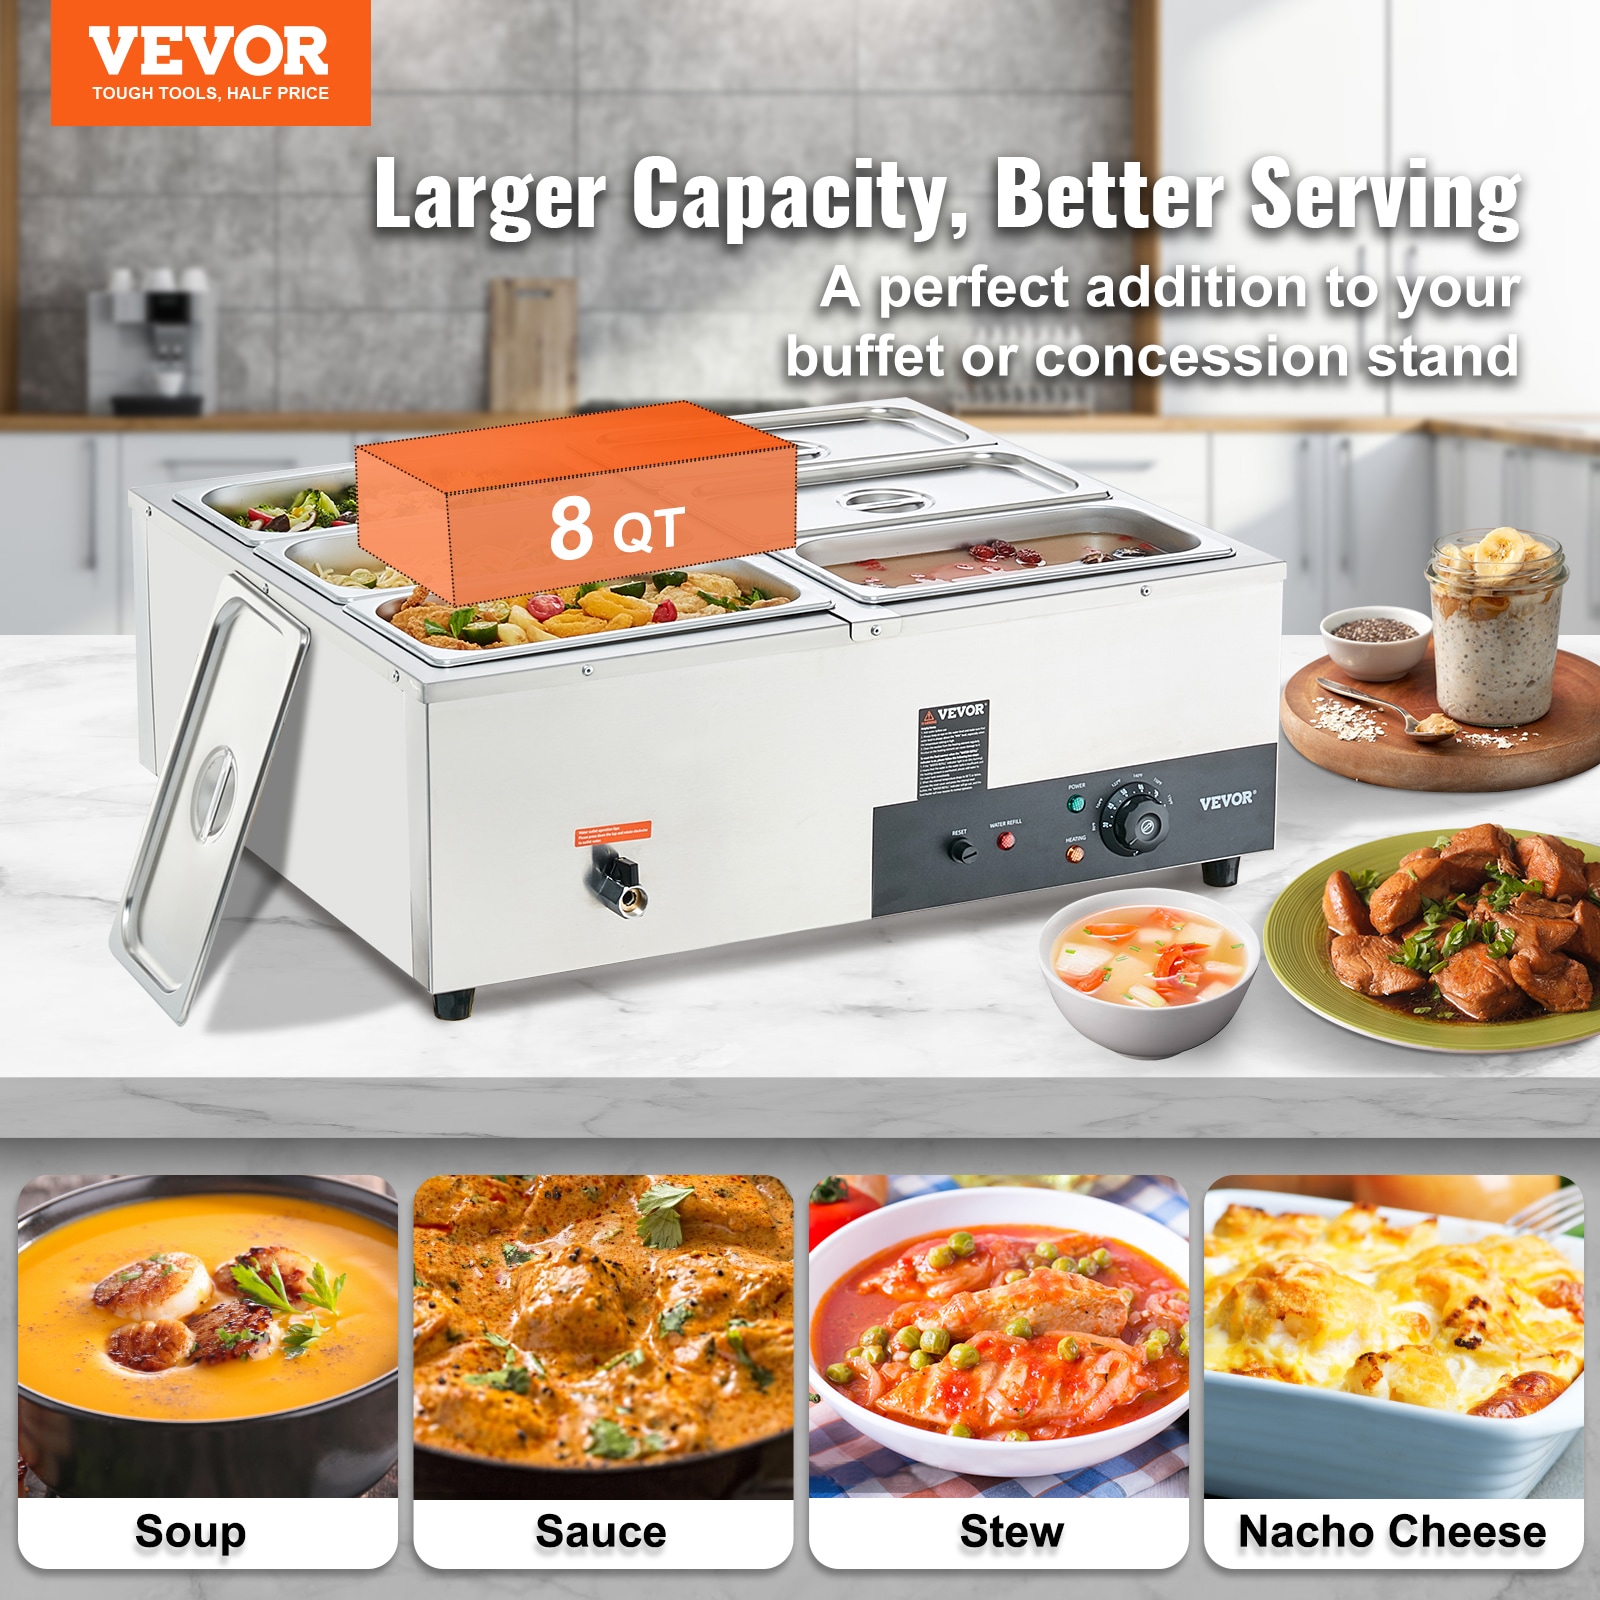 VEVOR Countertop Food Warmer - Don't Miss The Fresh Food